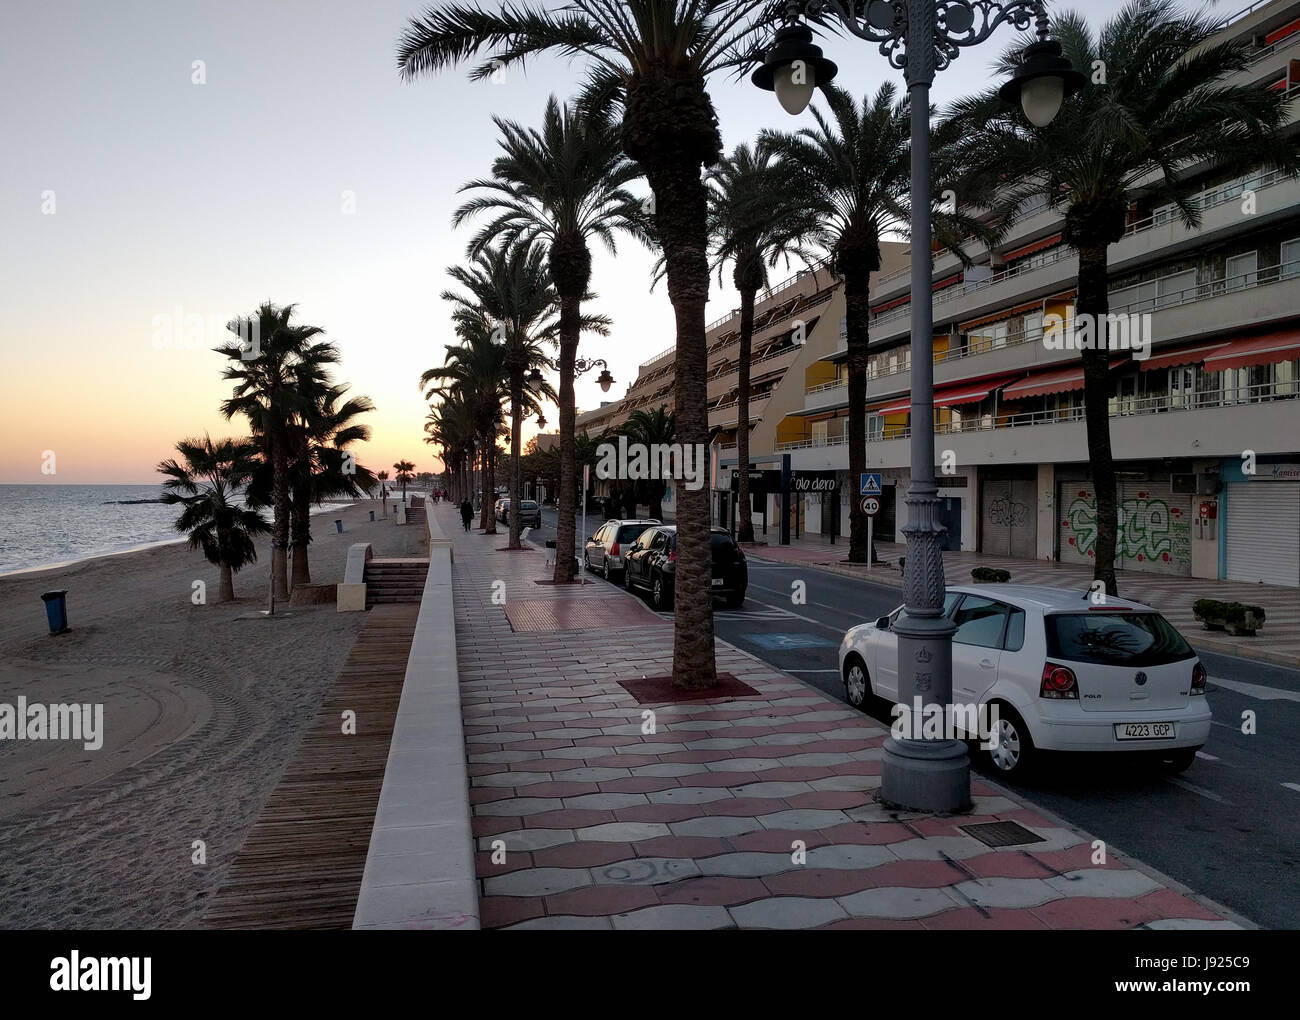 Aguadulce, Spain: December 6, 2016: Promenade of Aguadulce at sunset. Aguadulce is a spanish locality of Roquetas de Mar, province of Almeria. Spain Stock Photo